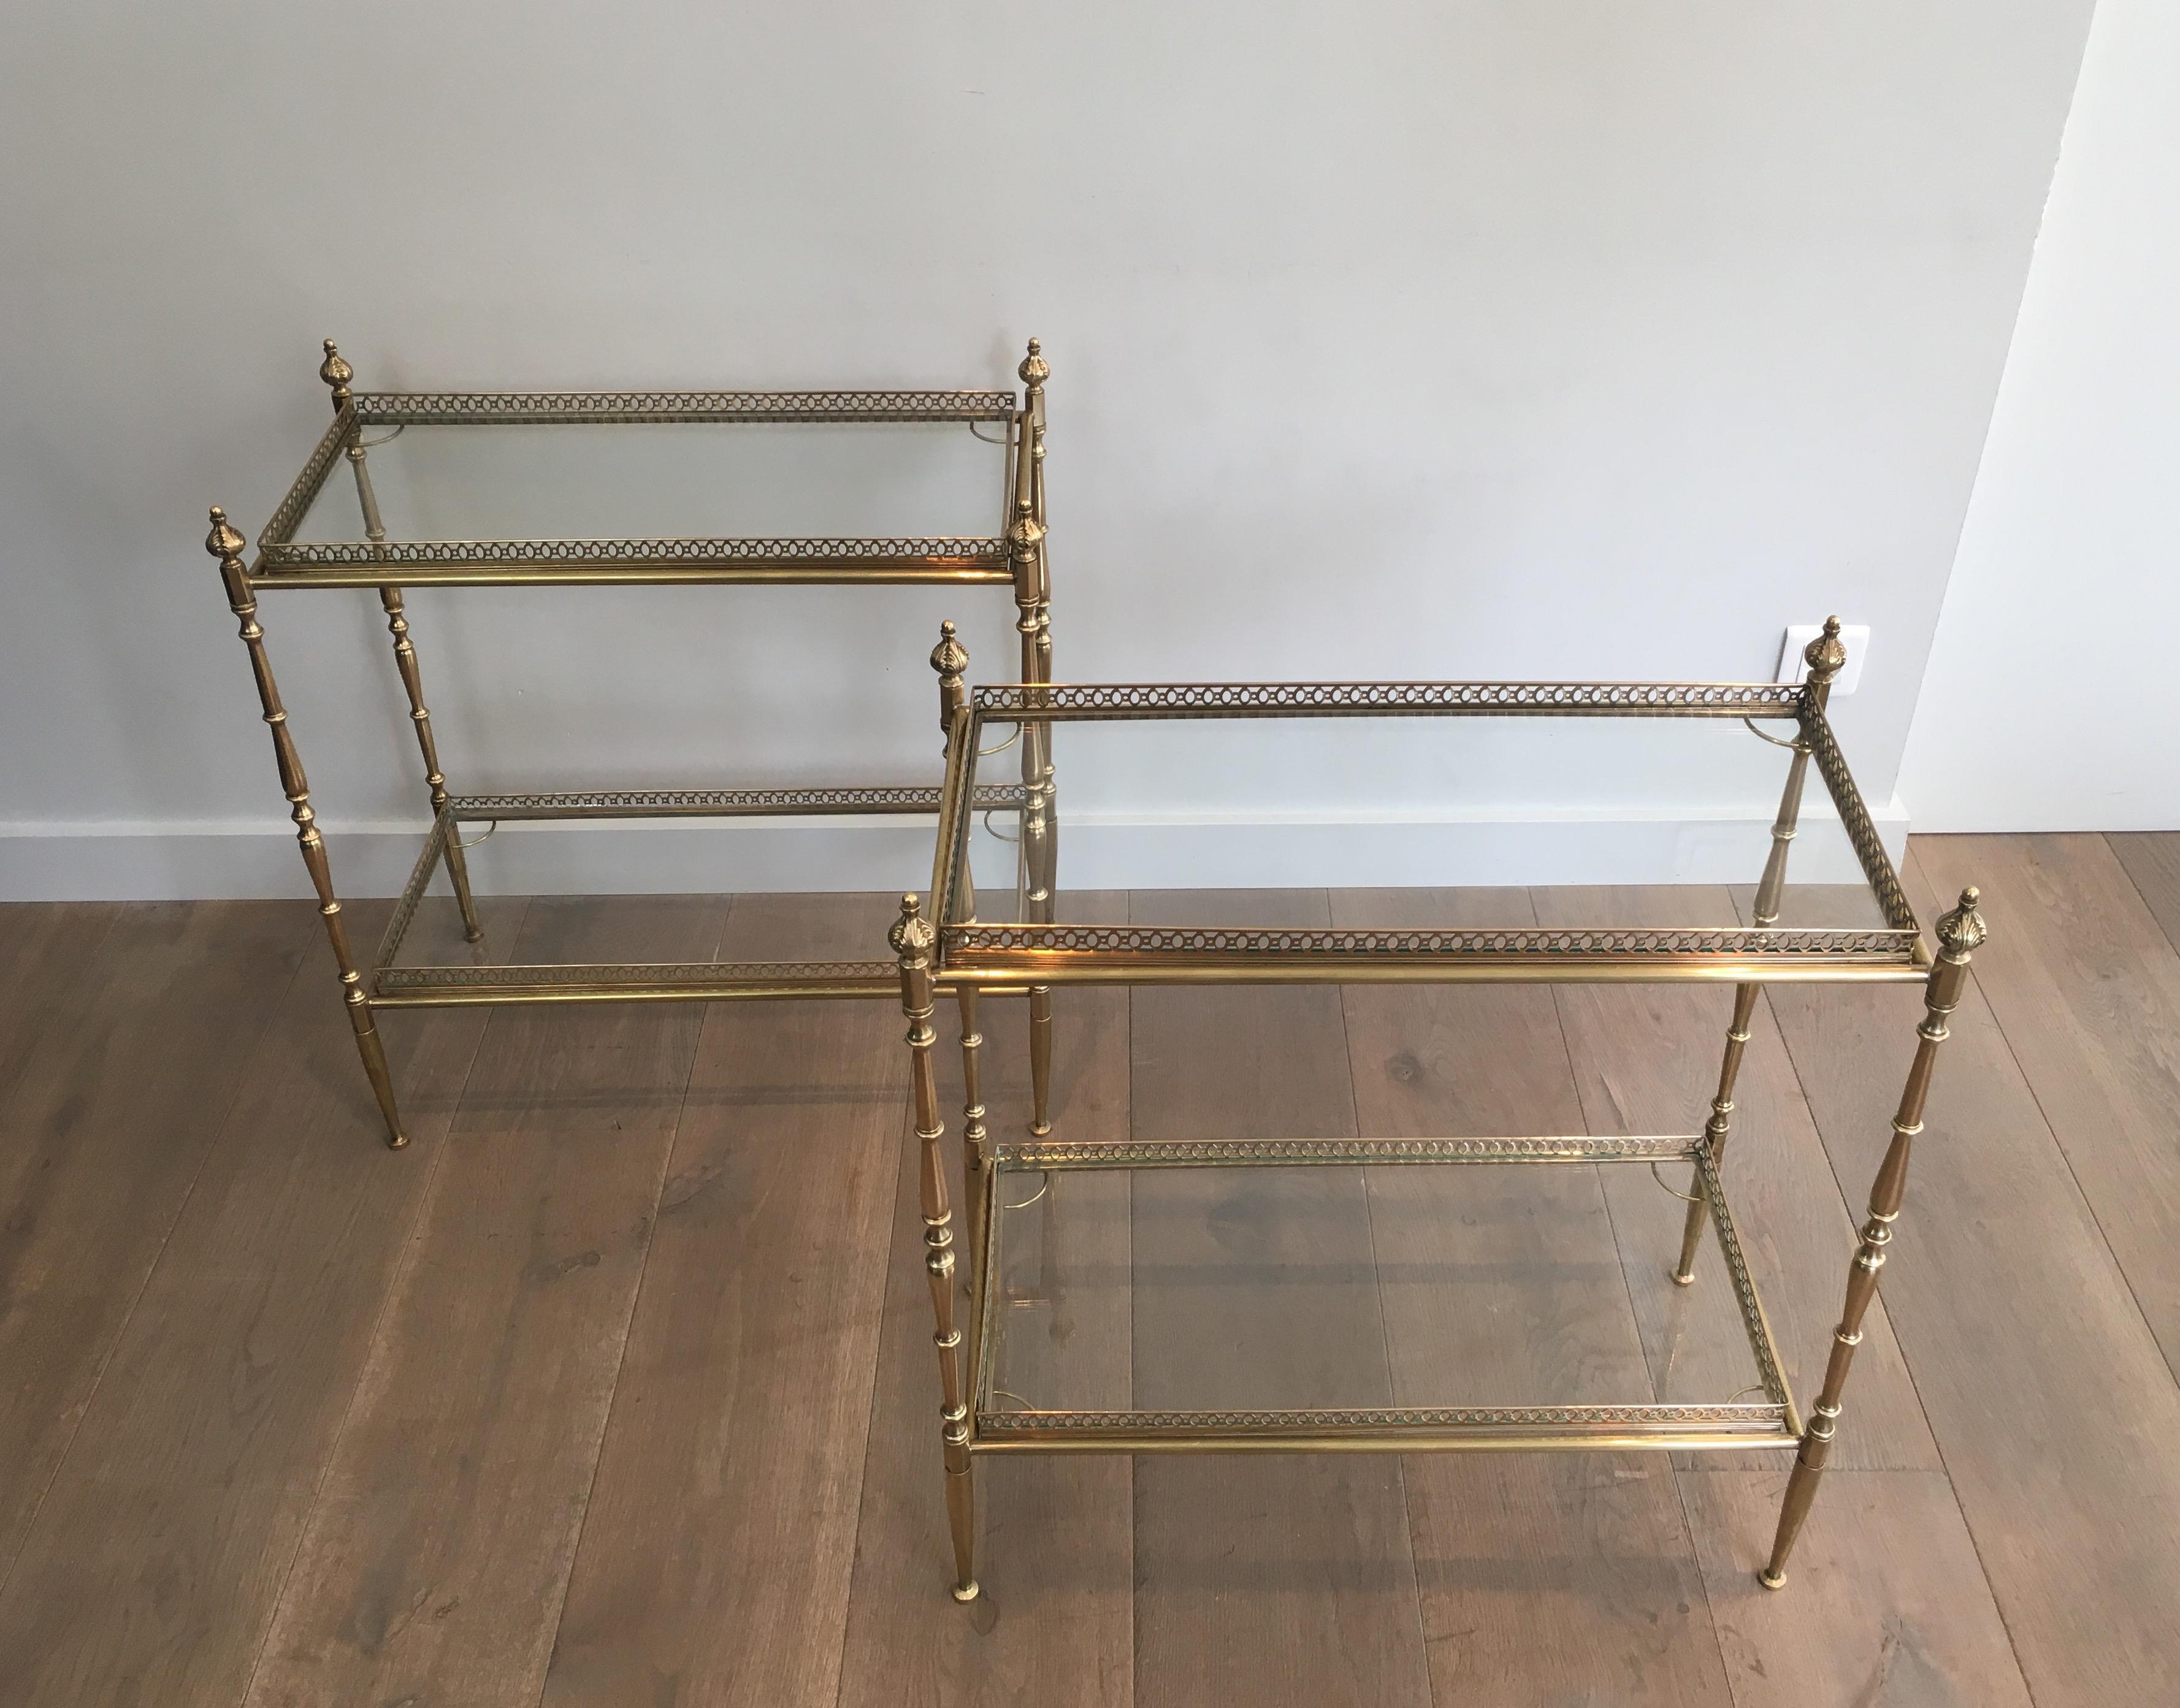 This large pair of neoclassical side tables is all made of brass with clear glass shelves. The glass shelves of these end tables are surrounded with fine brass galleries on bottom and top trays. This is a beautiful fine work by famous French